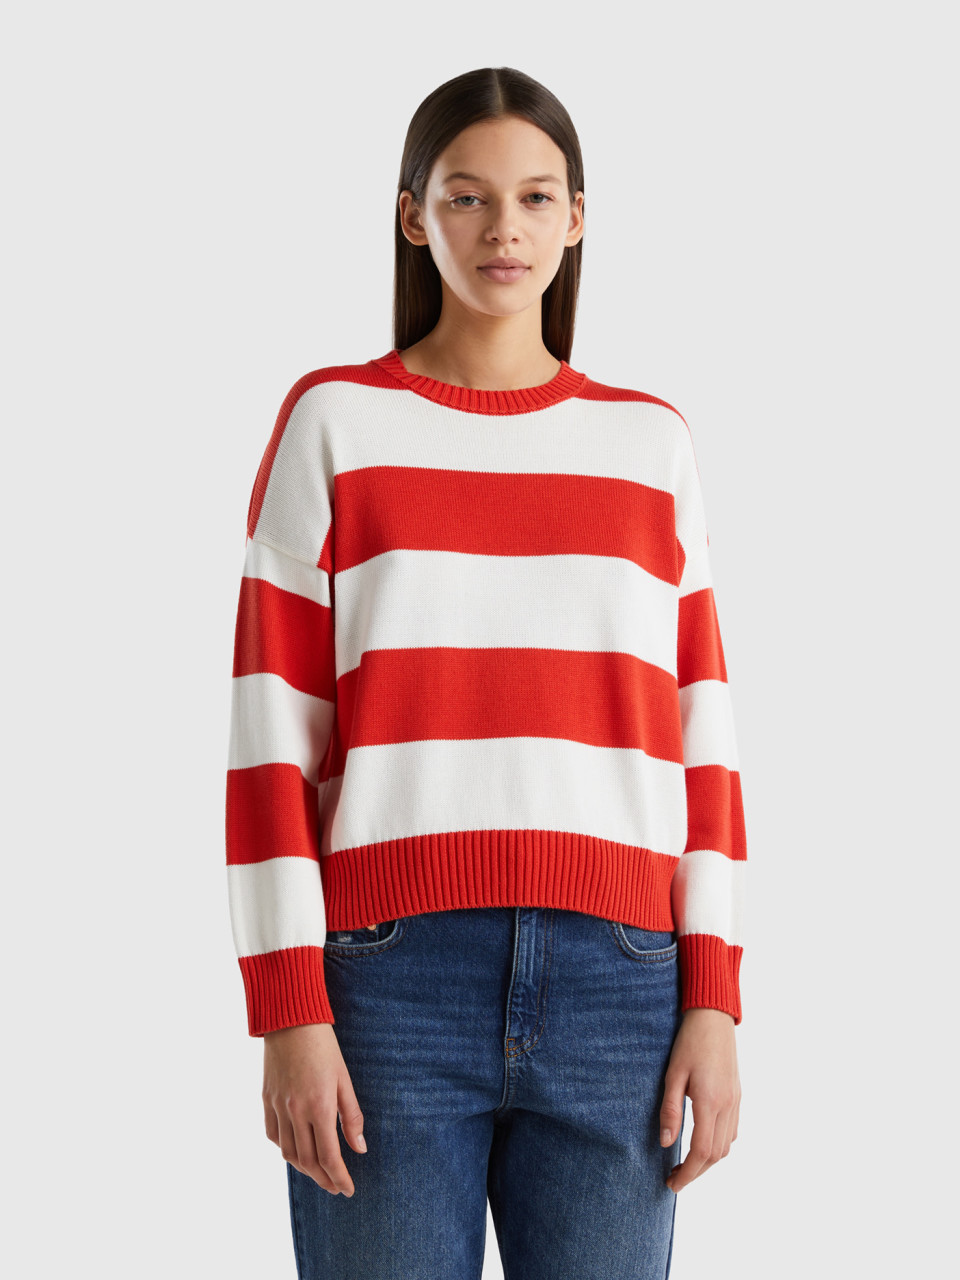 Benetton, Striped Sweater In Tricot Cotton, Red, Women